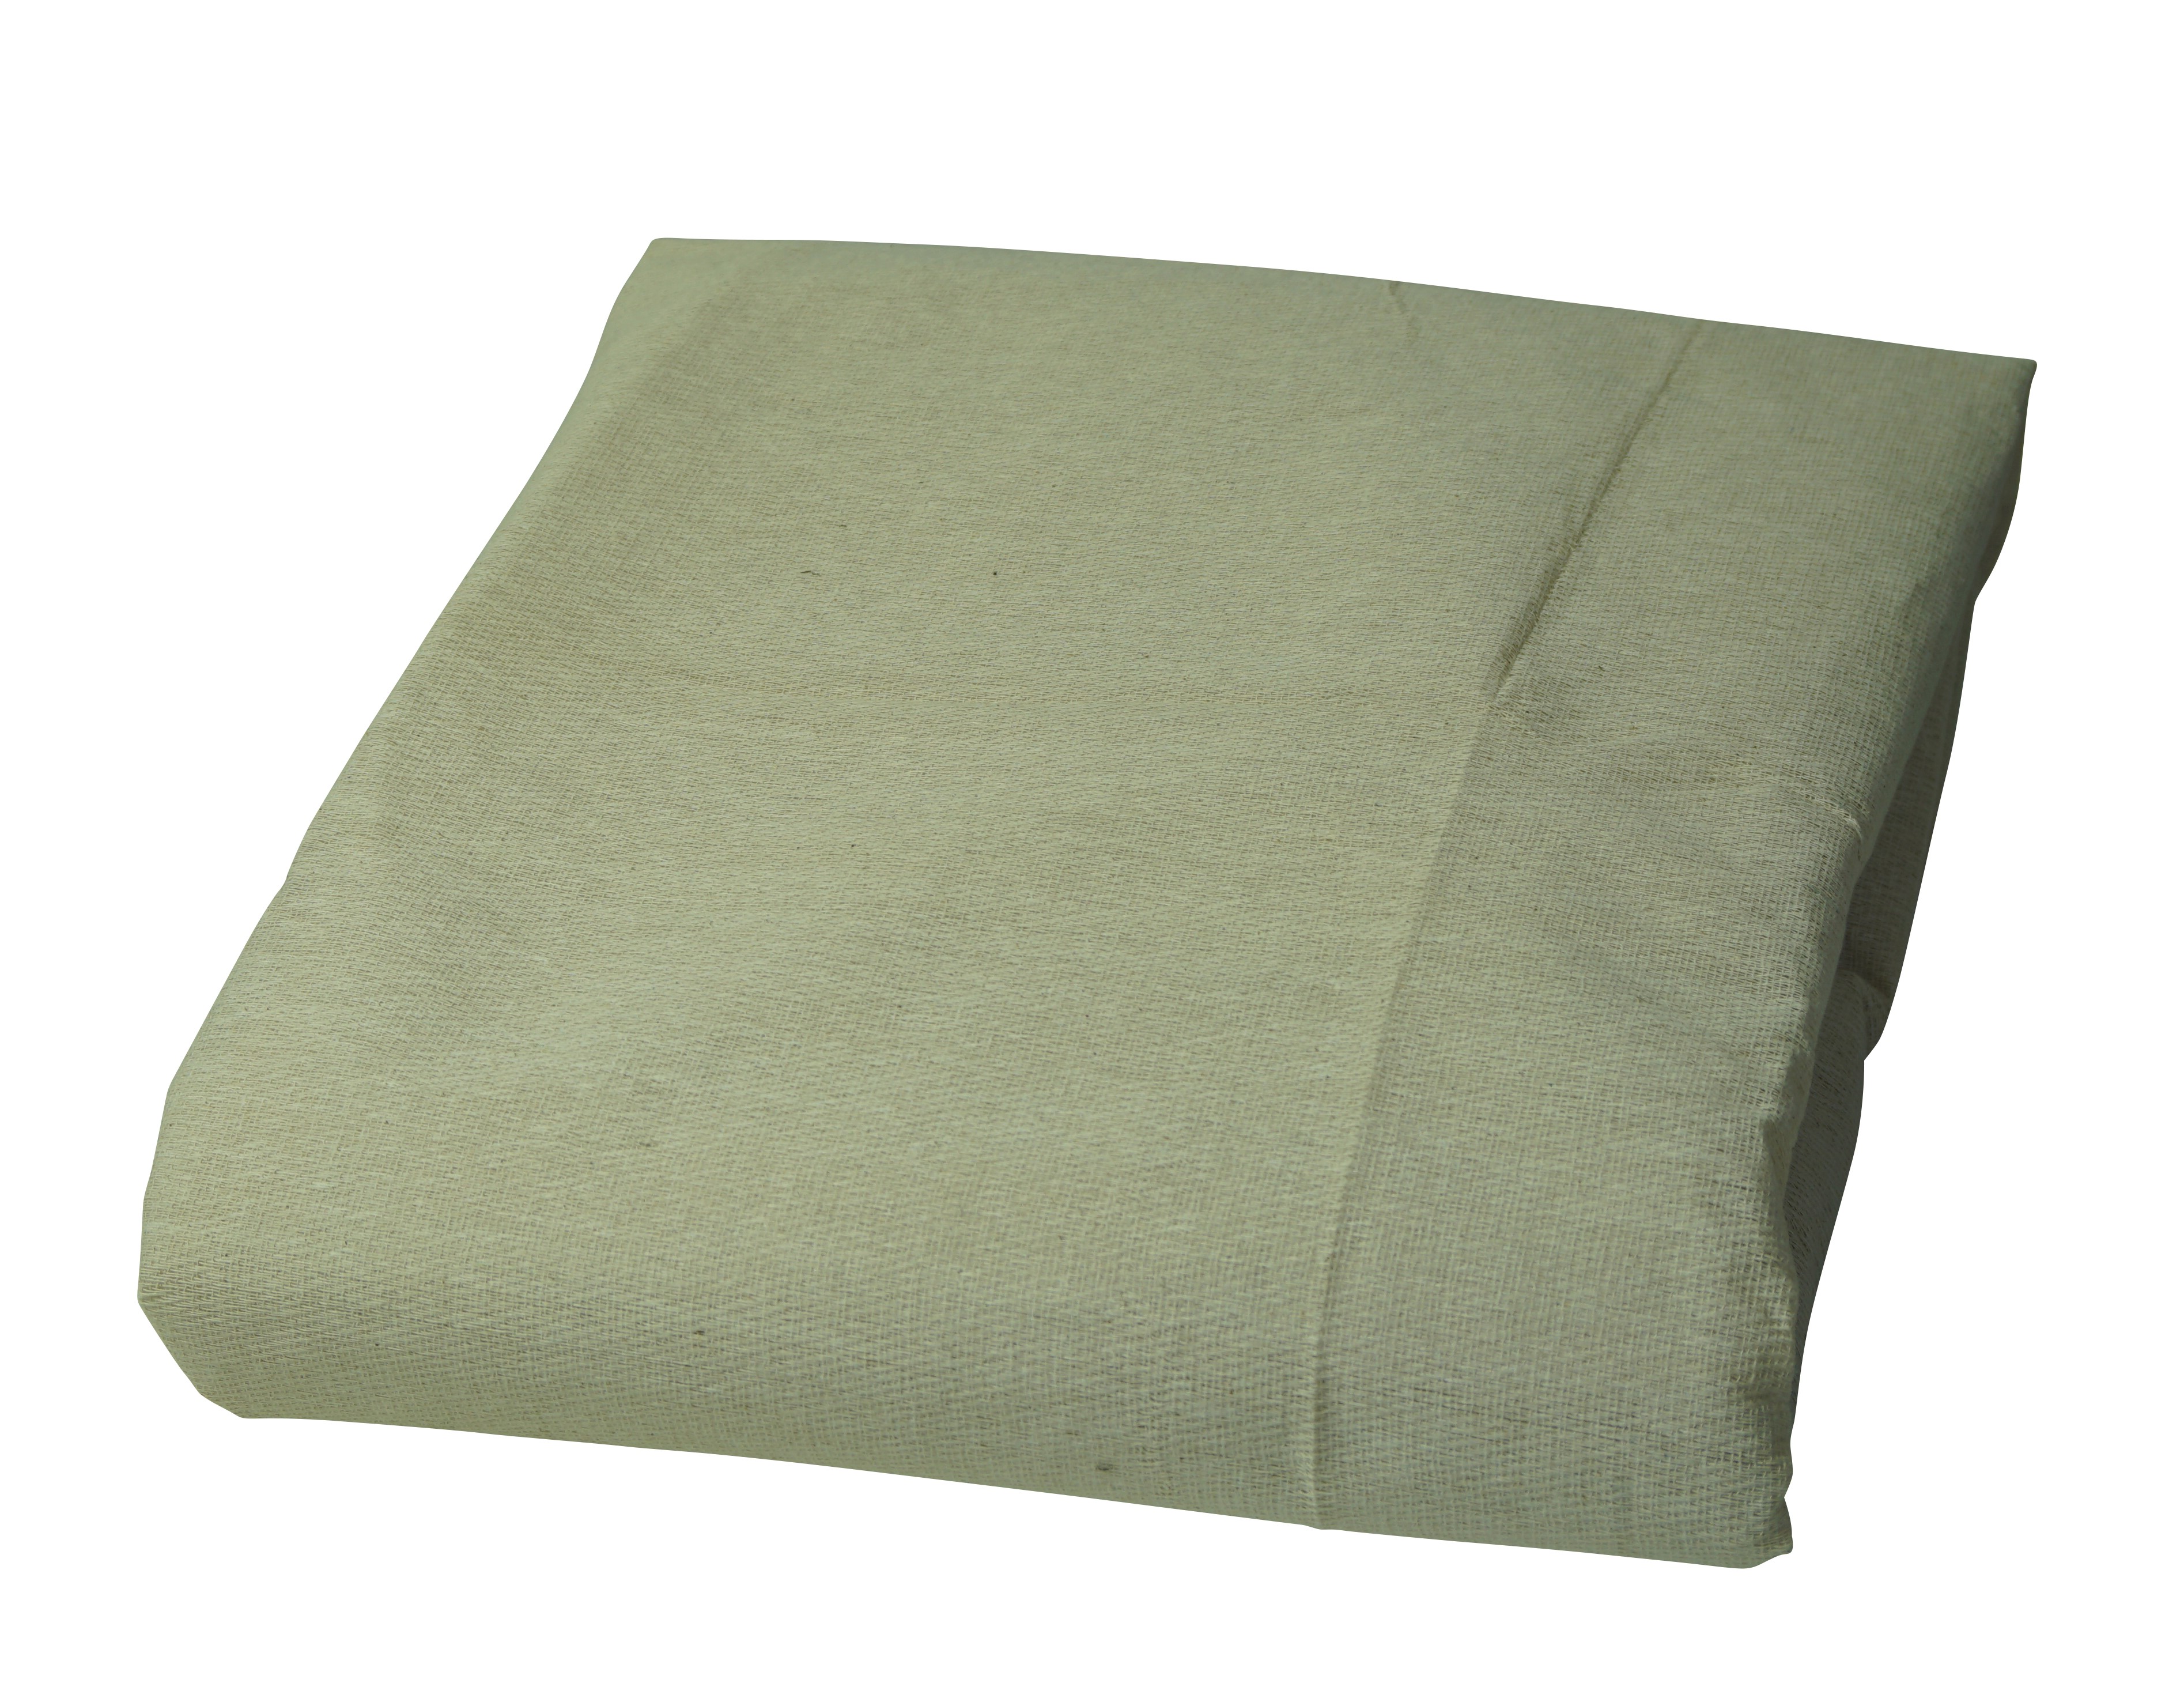 3.6m x 2.7m Cotton Twill Dust Sheets with Laminated Polythene backing